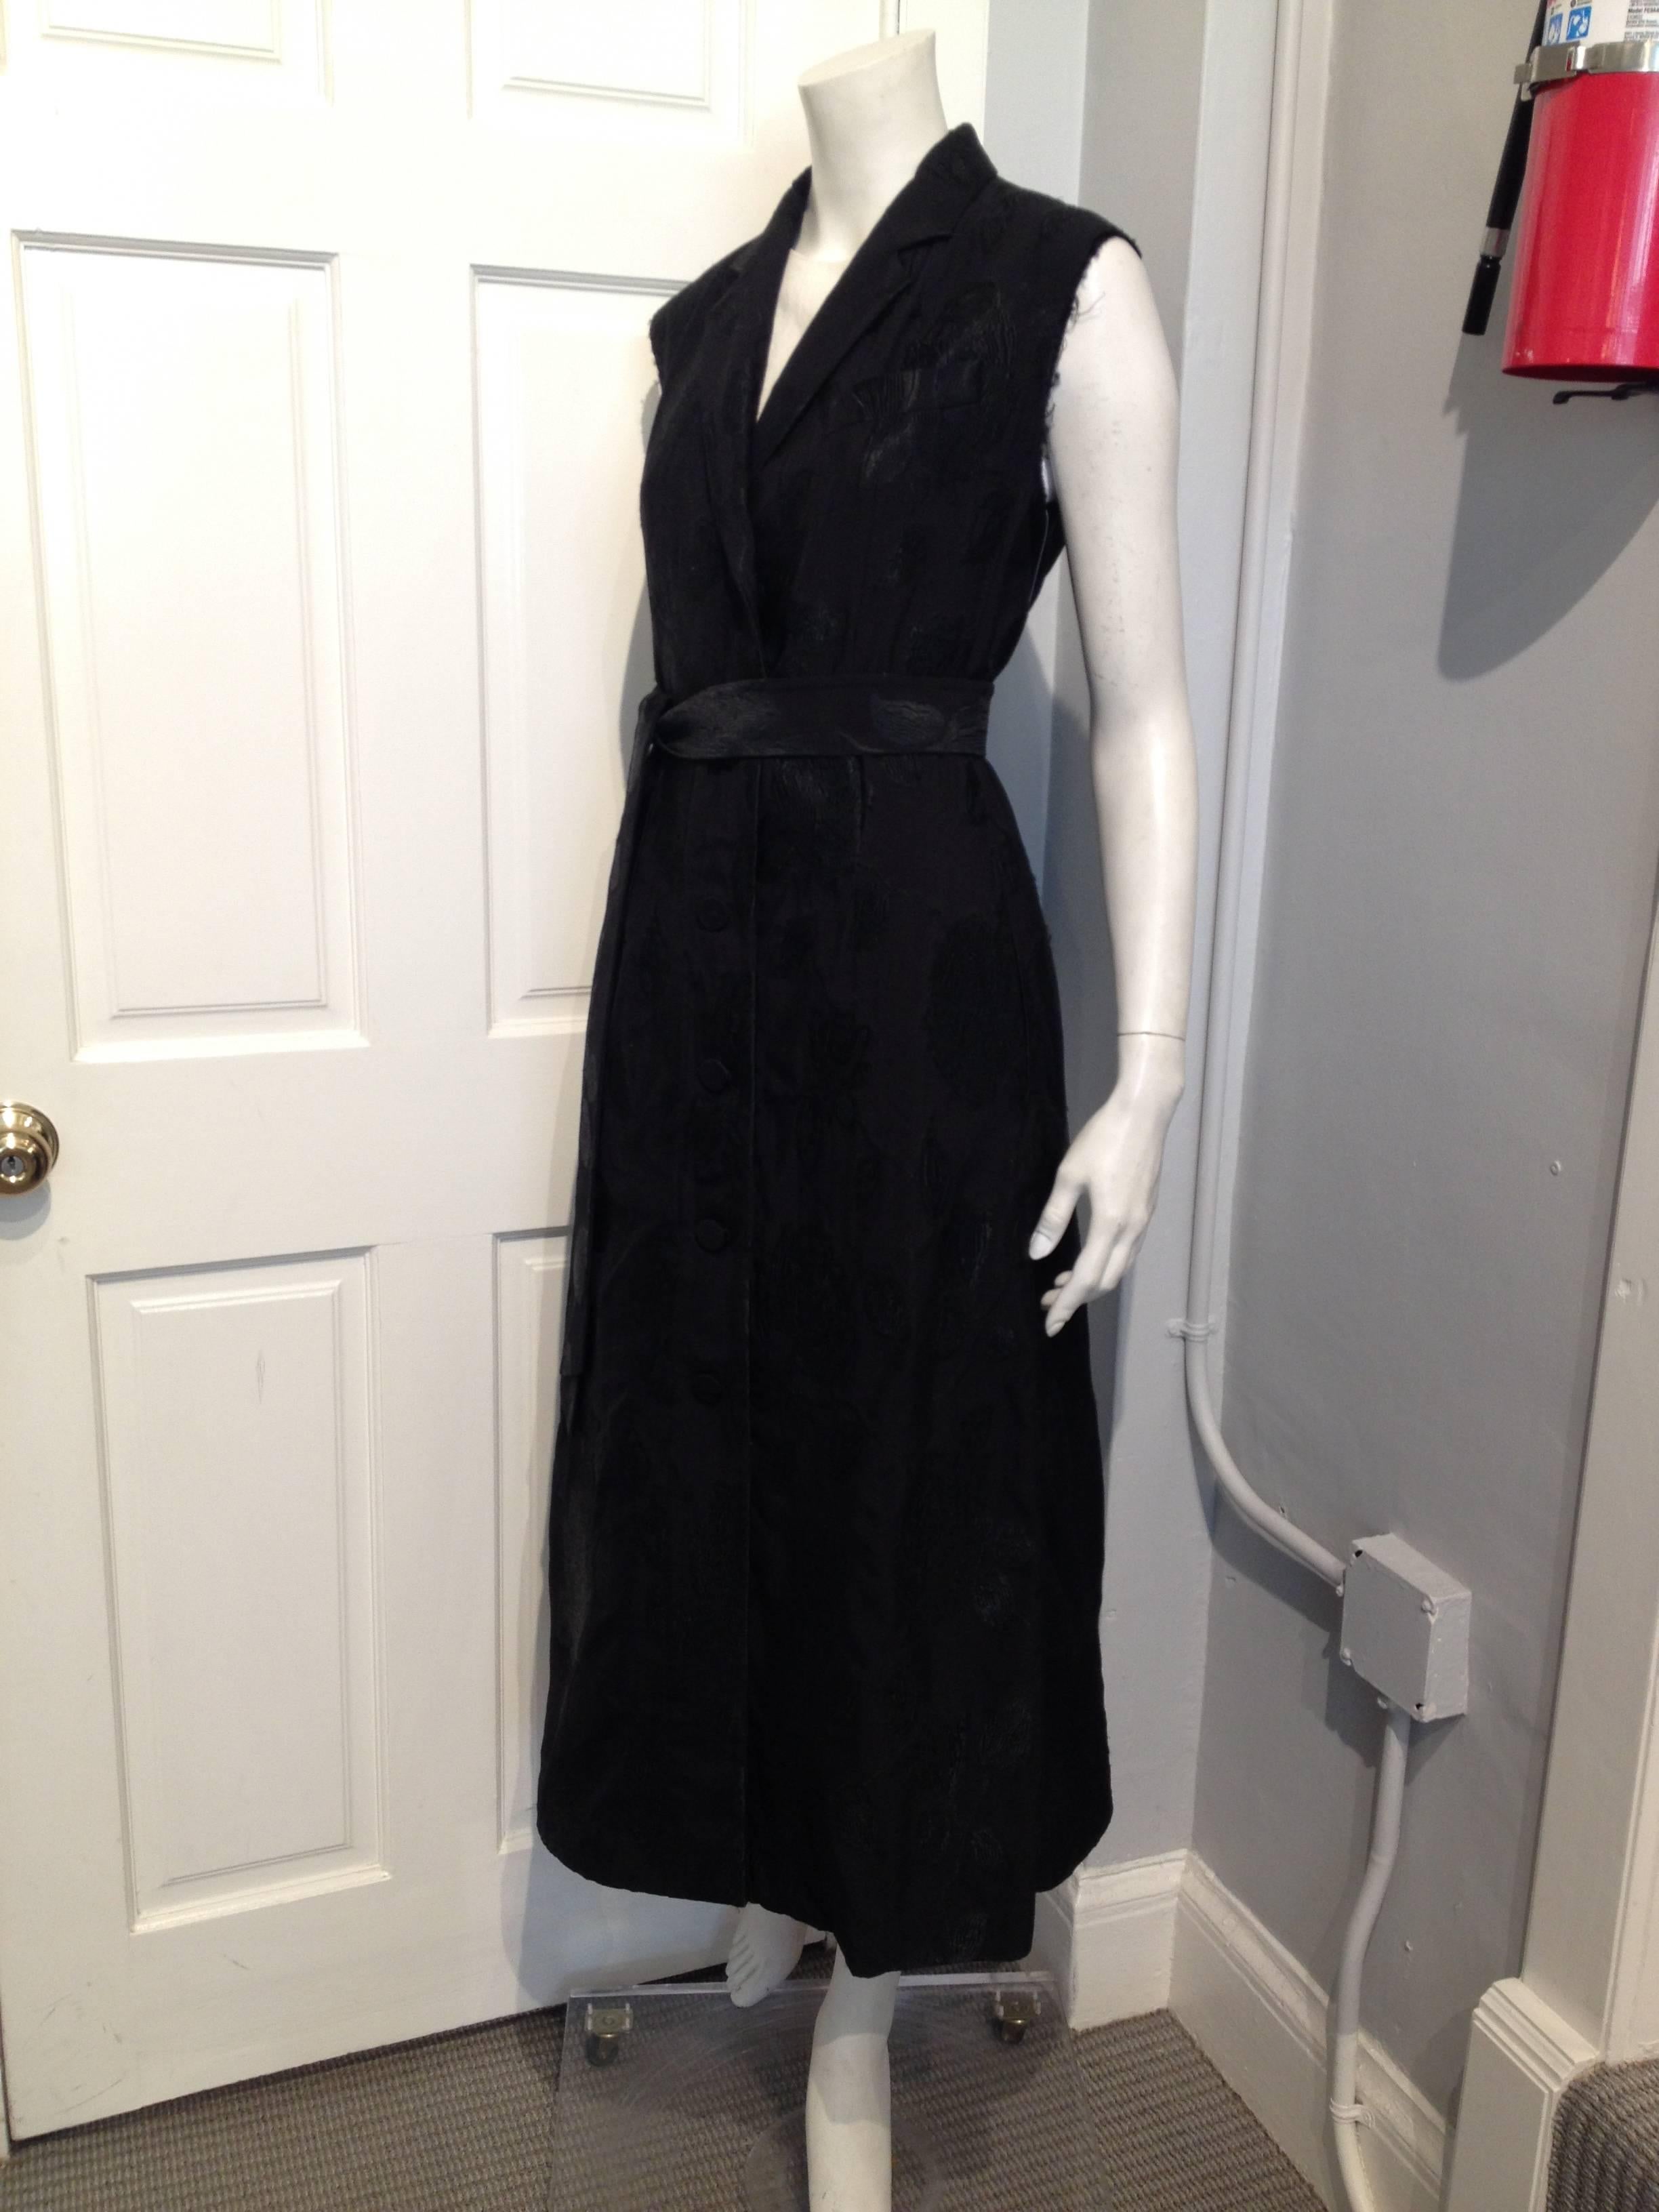 Gorgeous black-on-black floral brocade material cut into a long sleeveless dress coat with lapel collars, brocade-covered buttons running down the front, frayed sleeves, and a below-the-knee hemline. Belt is removable.